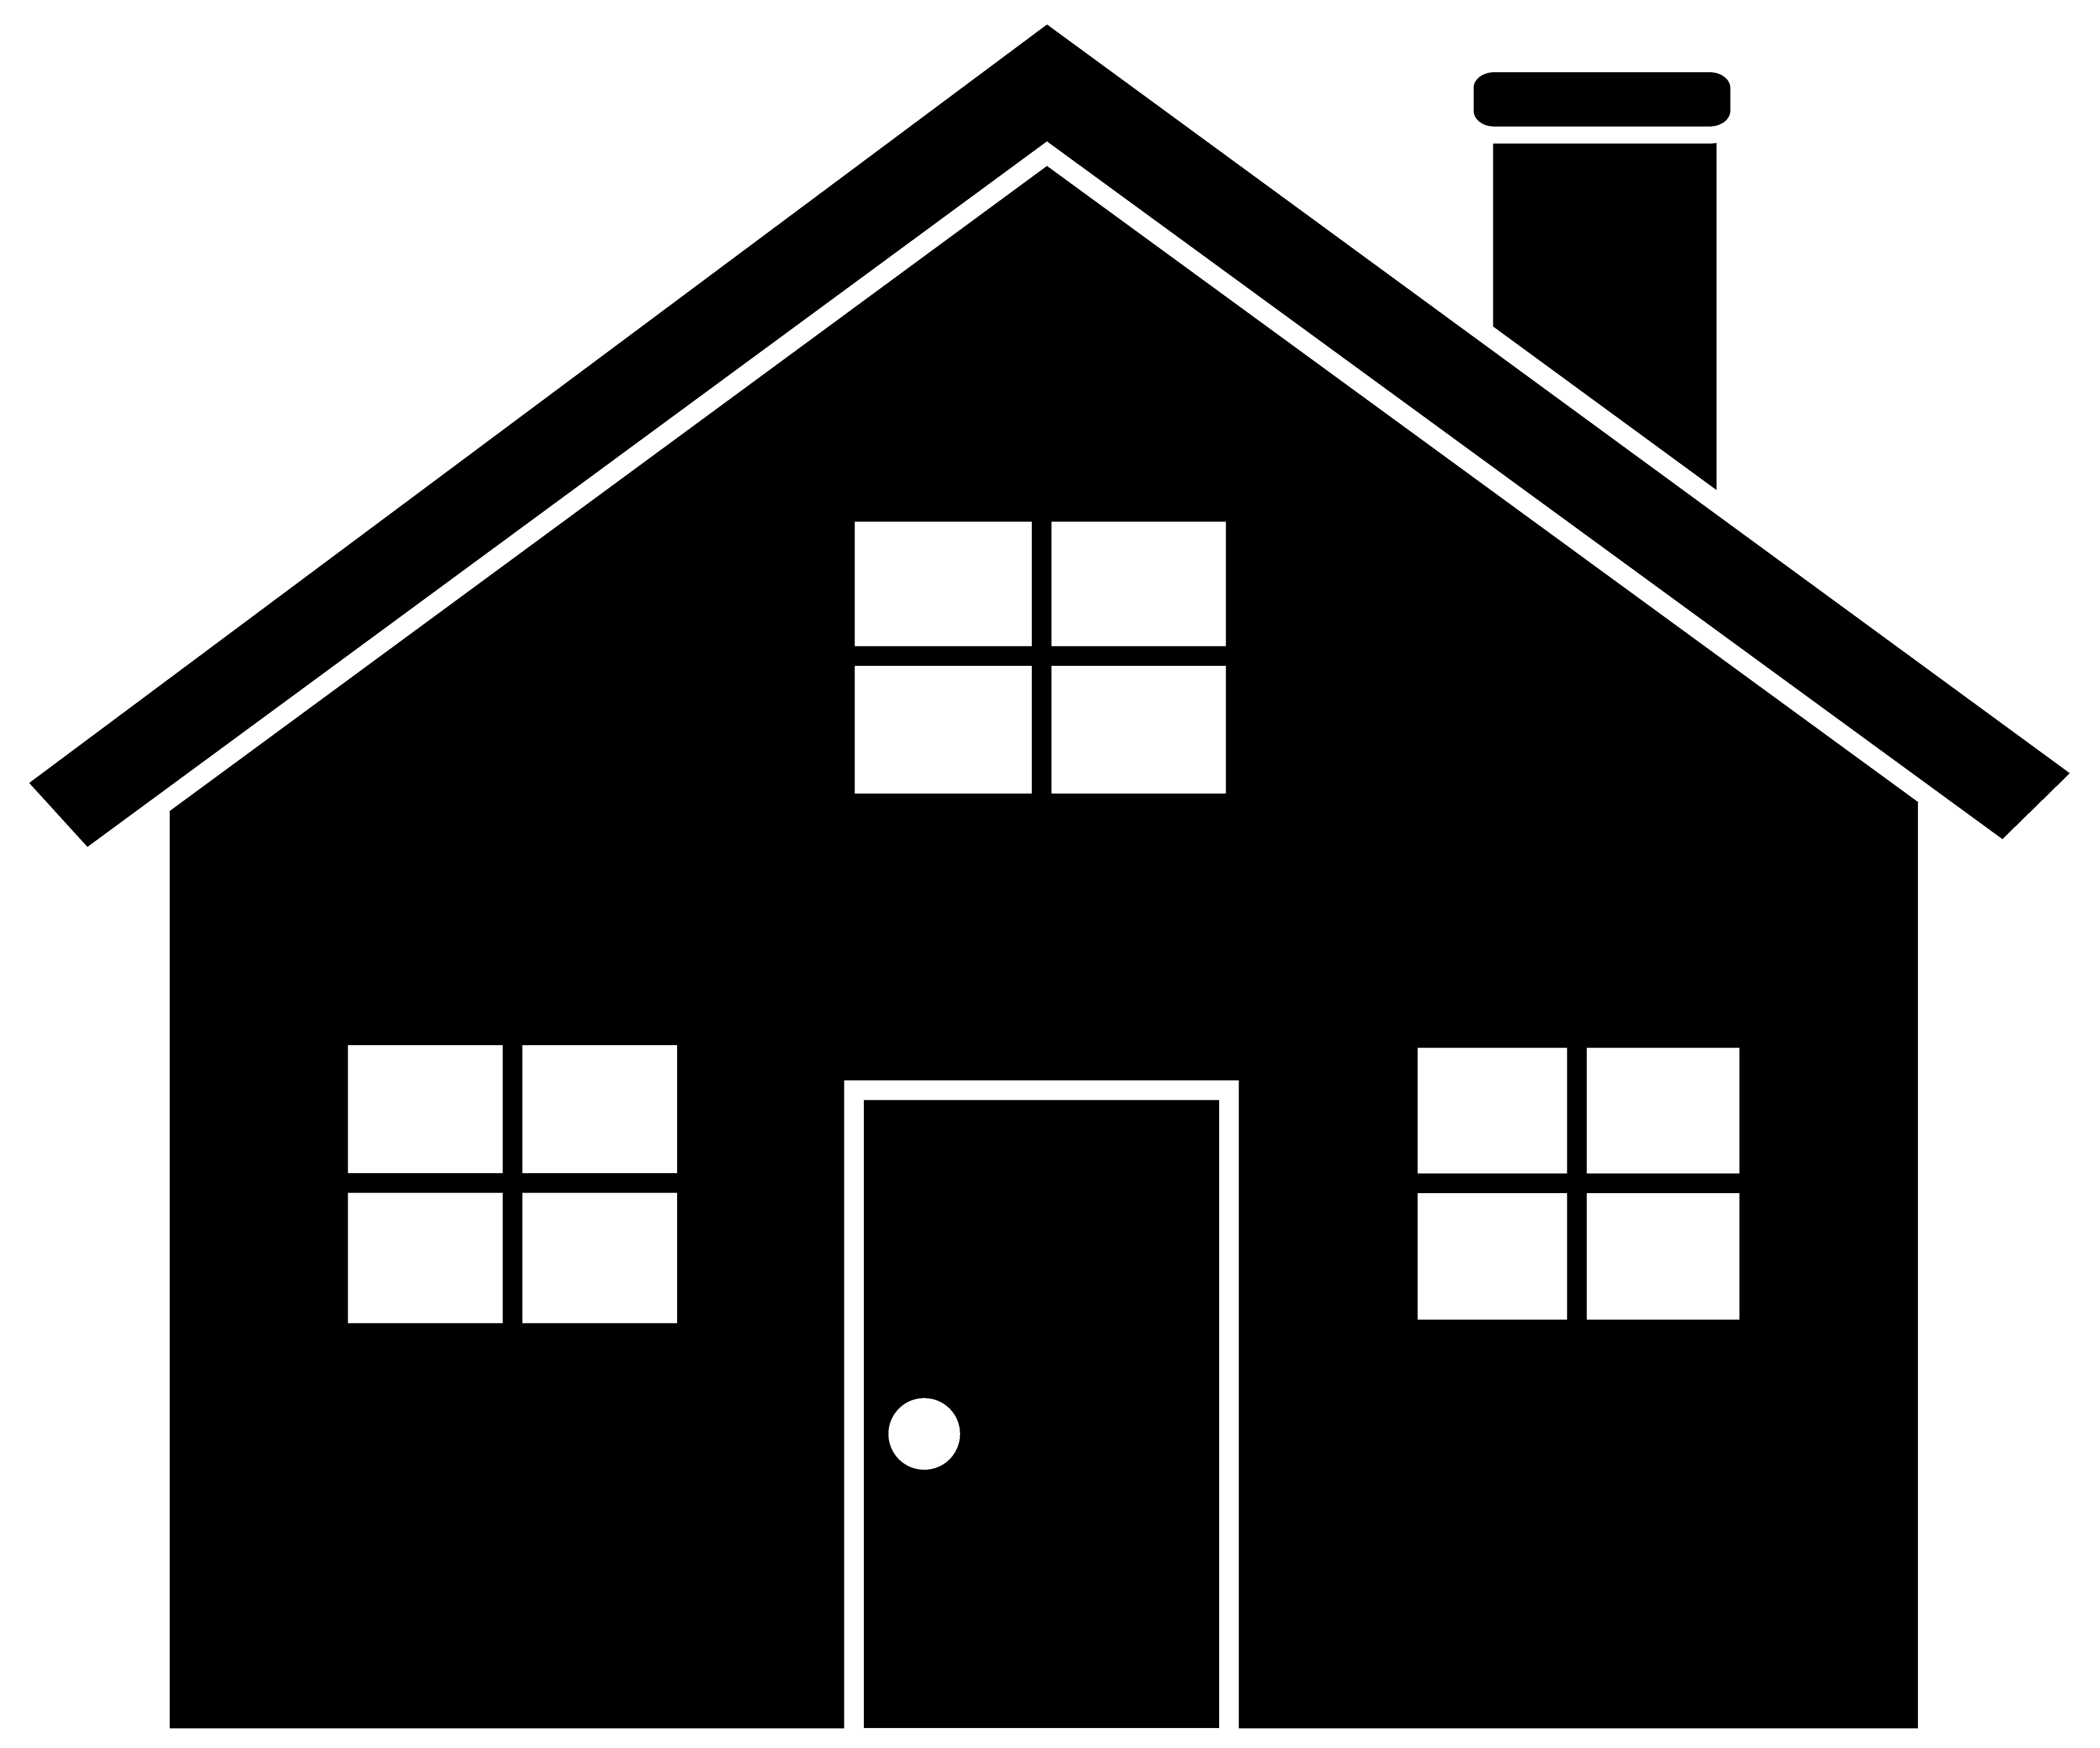 Home haunted house clip art images free clipart cliparting